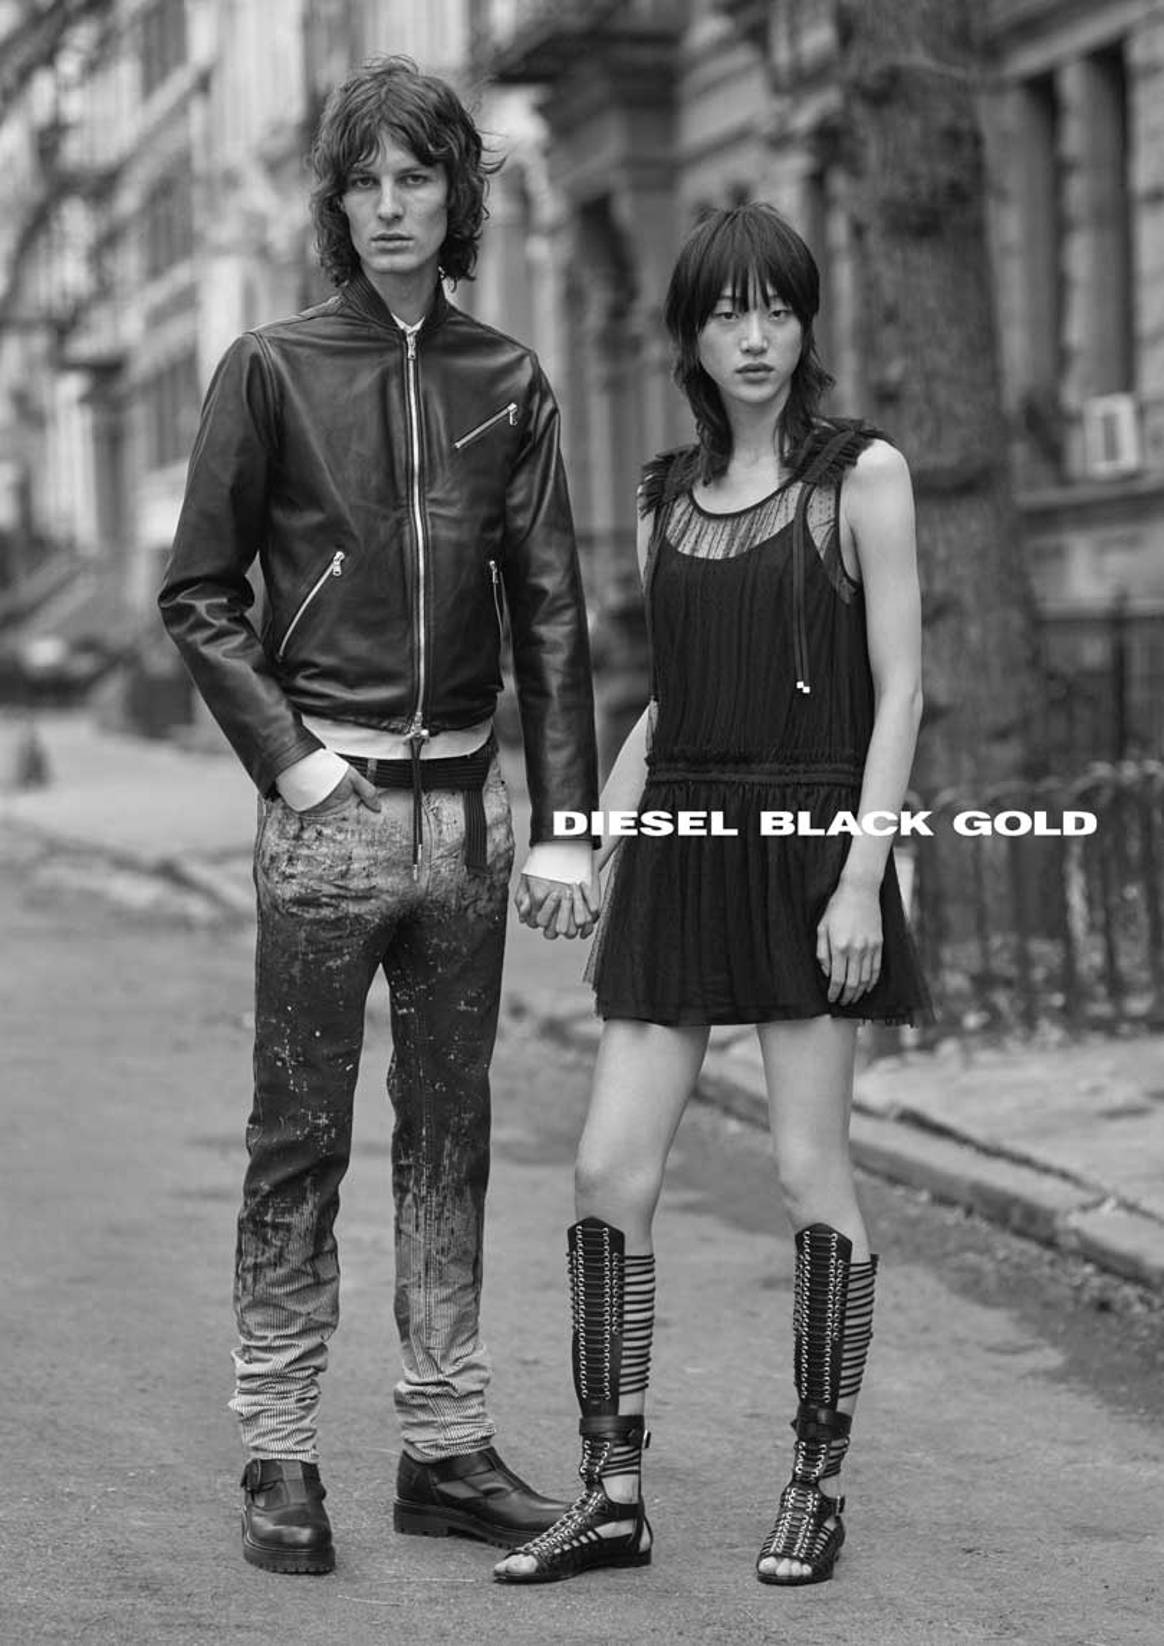 Diesel Black Gold to go coed this June